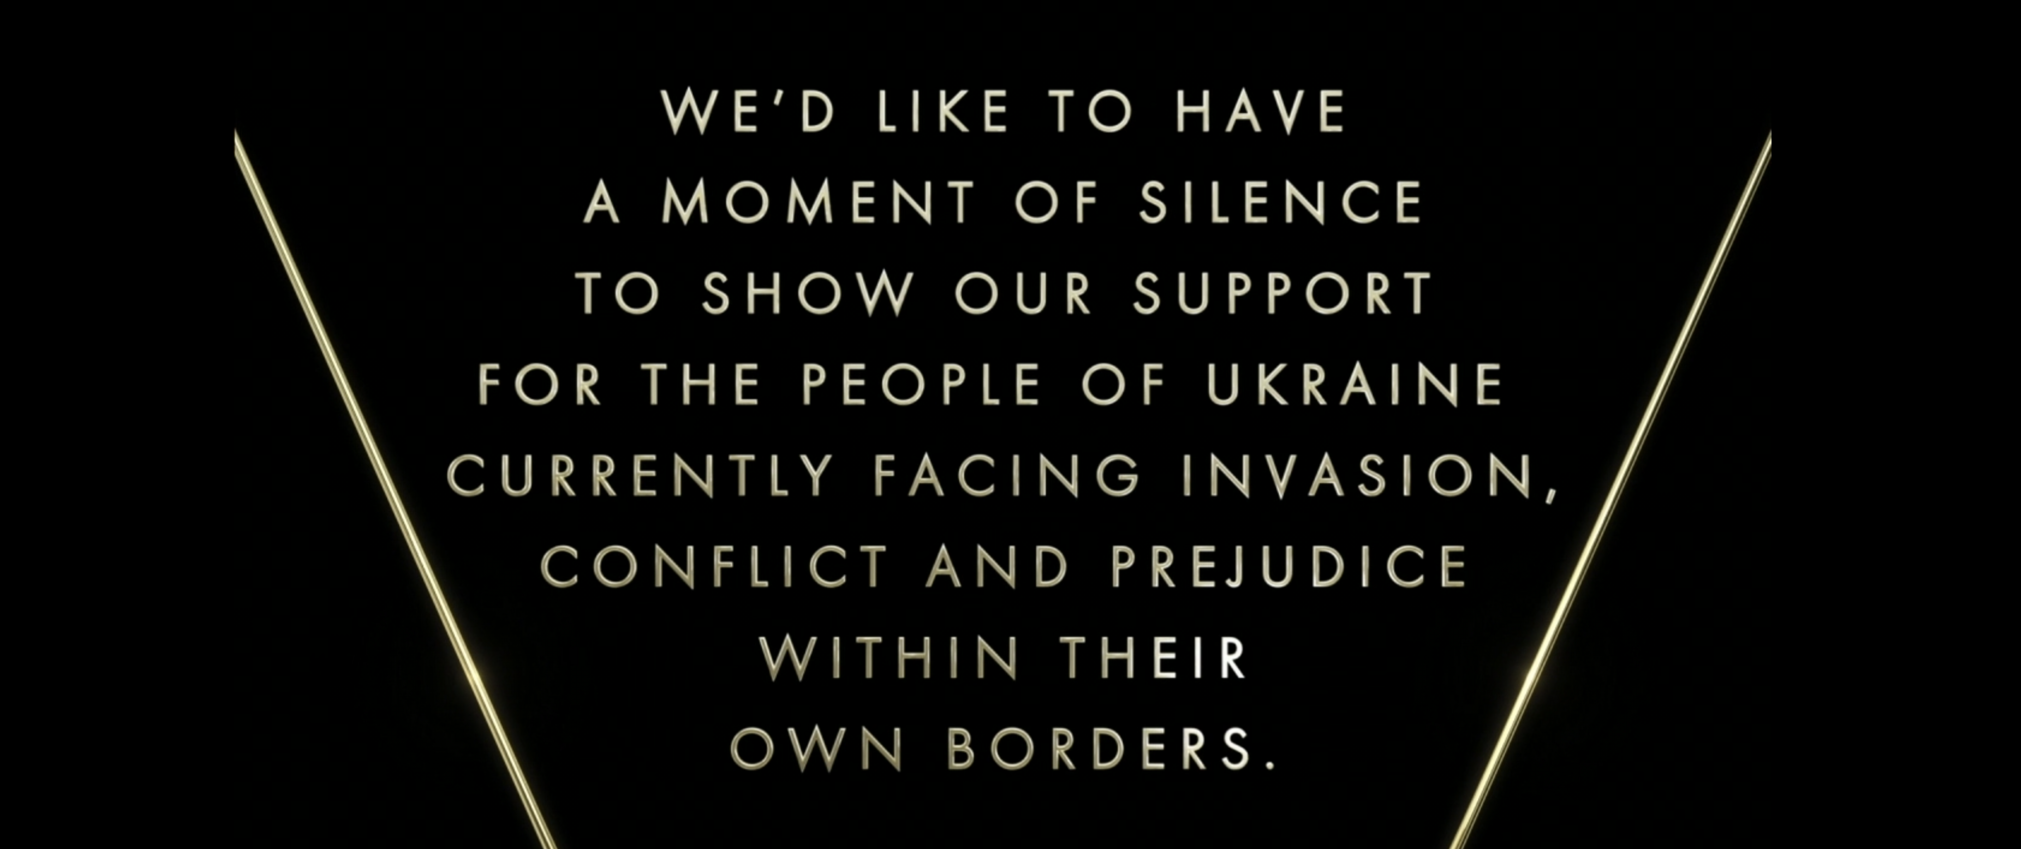 The Oscars Has Moment of Silence To Show Support to Ukraine